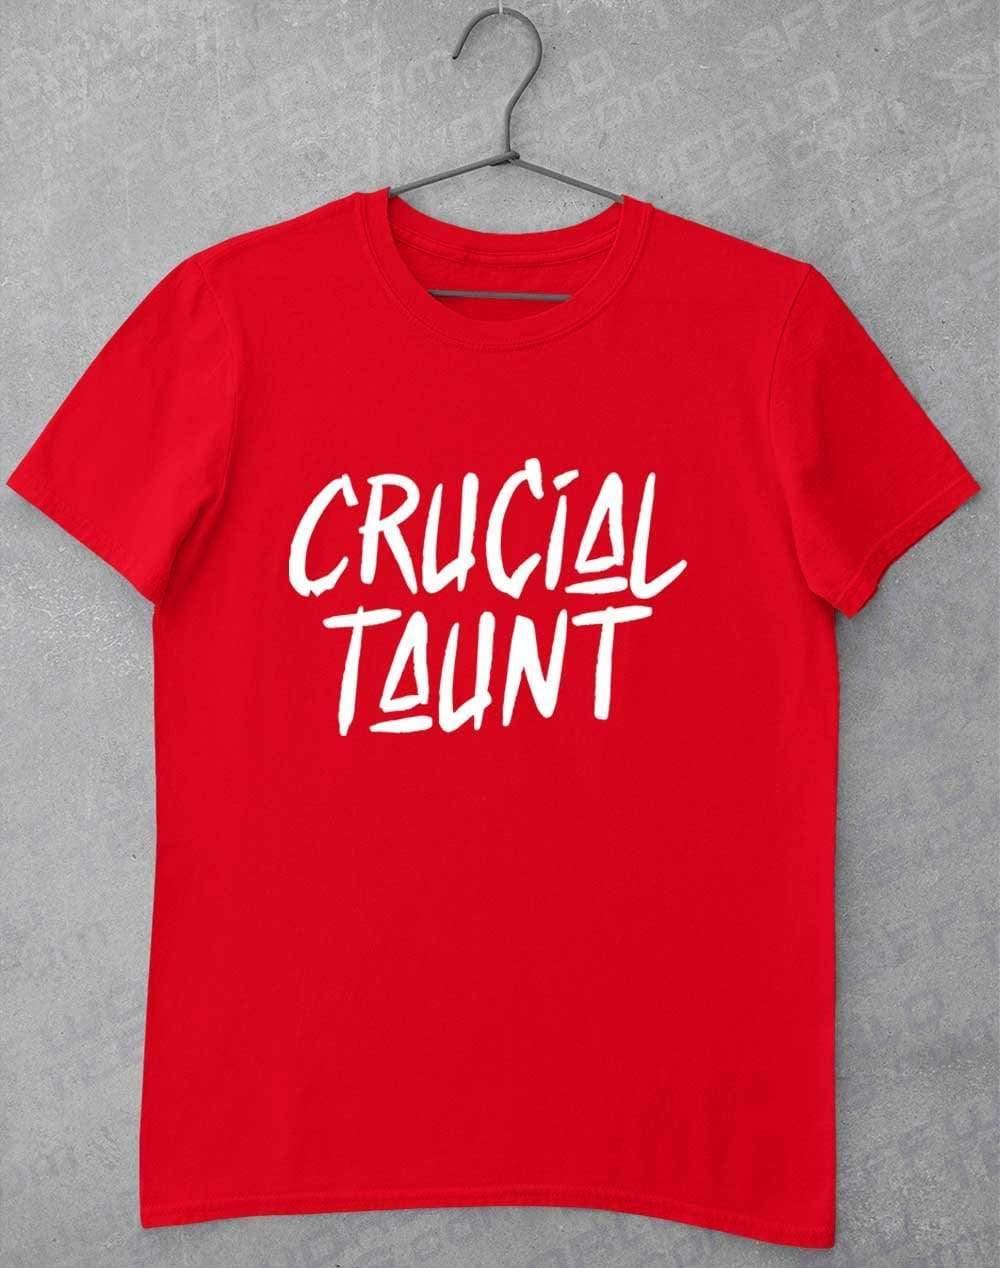 Crucial Taunt T-Shirt S / Red  - Off World Tees